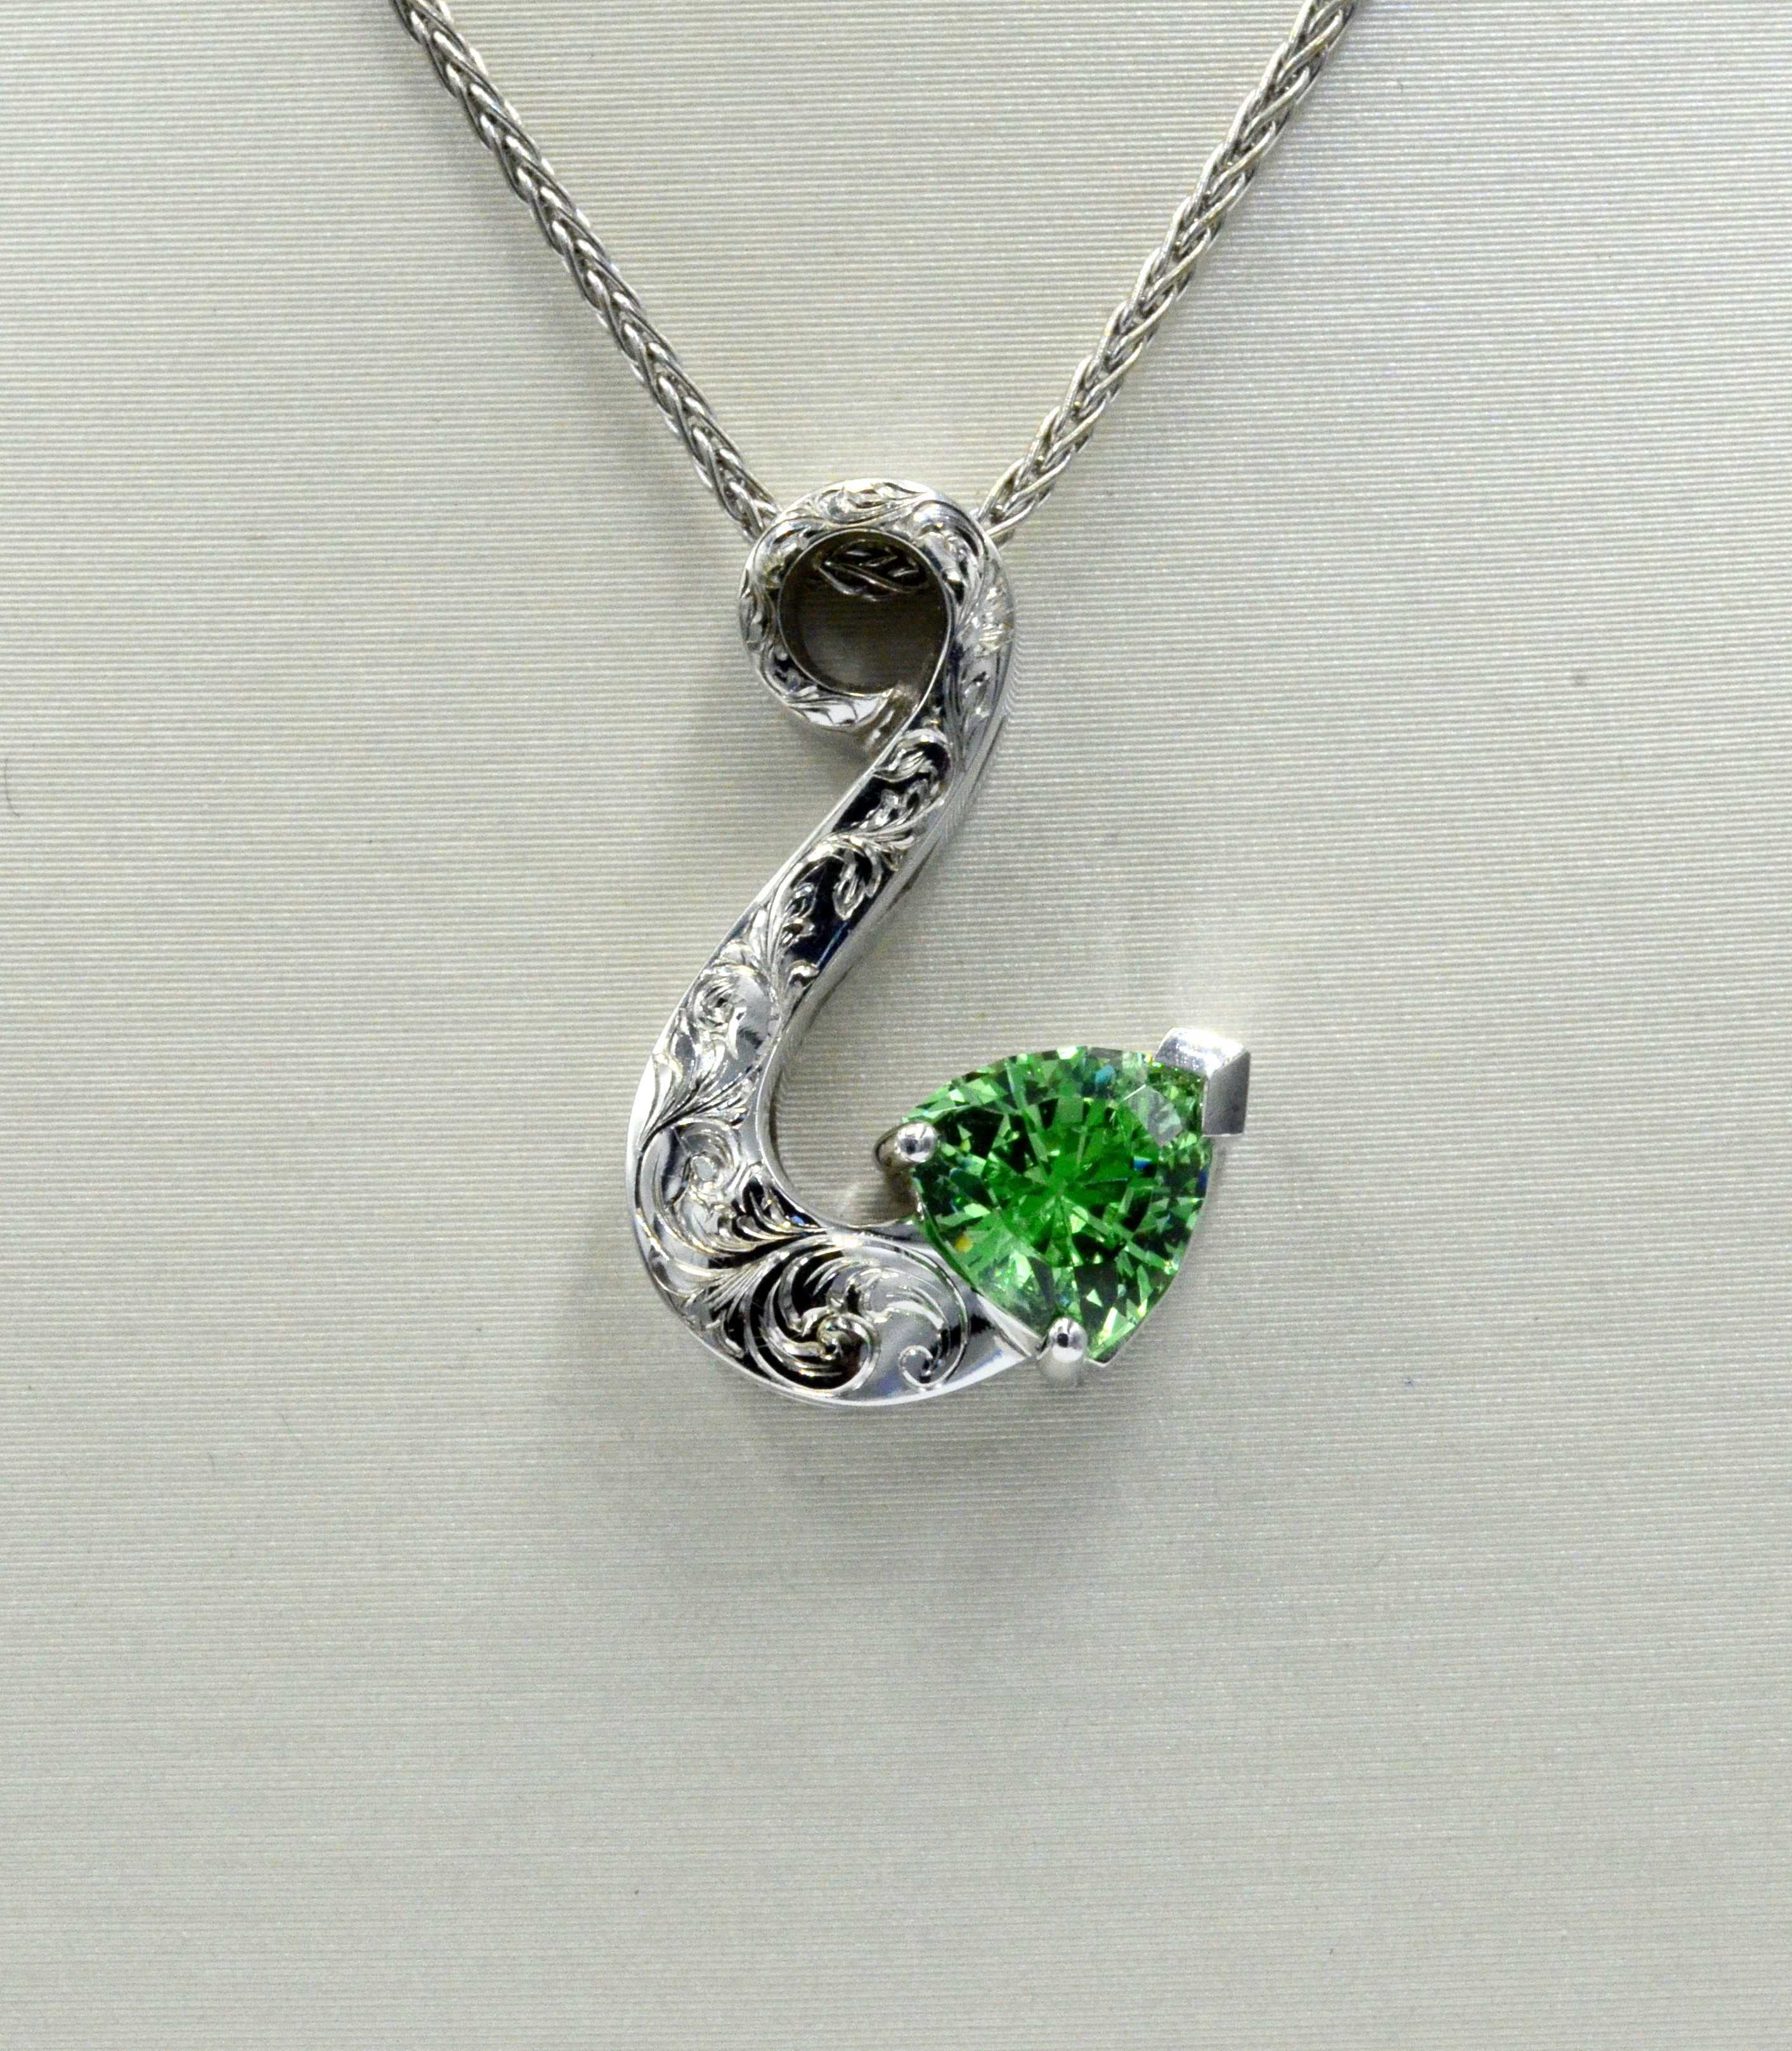 I purchased this gemstone as a rough crystal in Africa. Rich and vibrant color. Pendant is accented with hand engraving